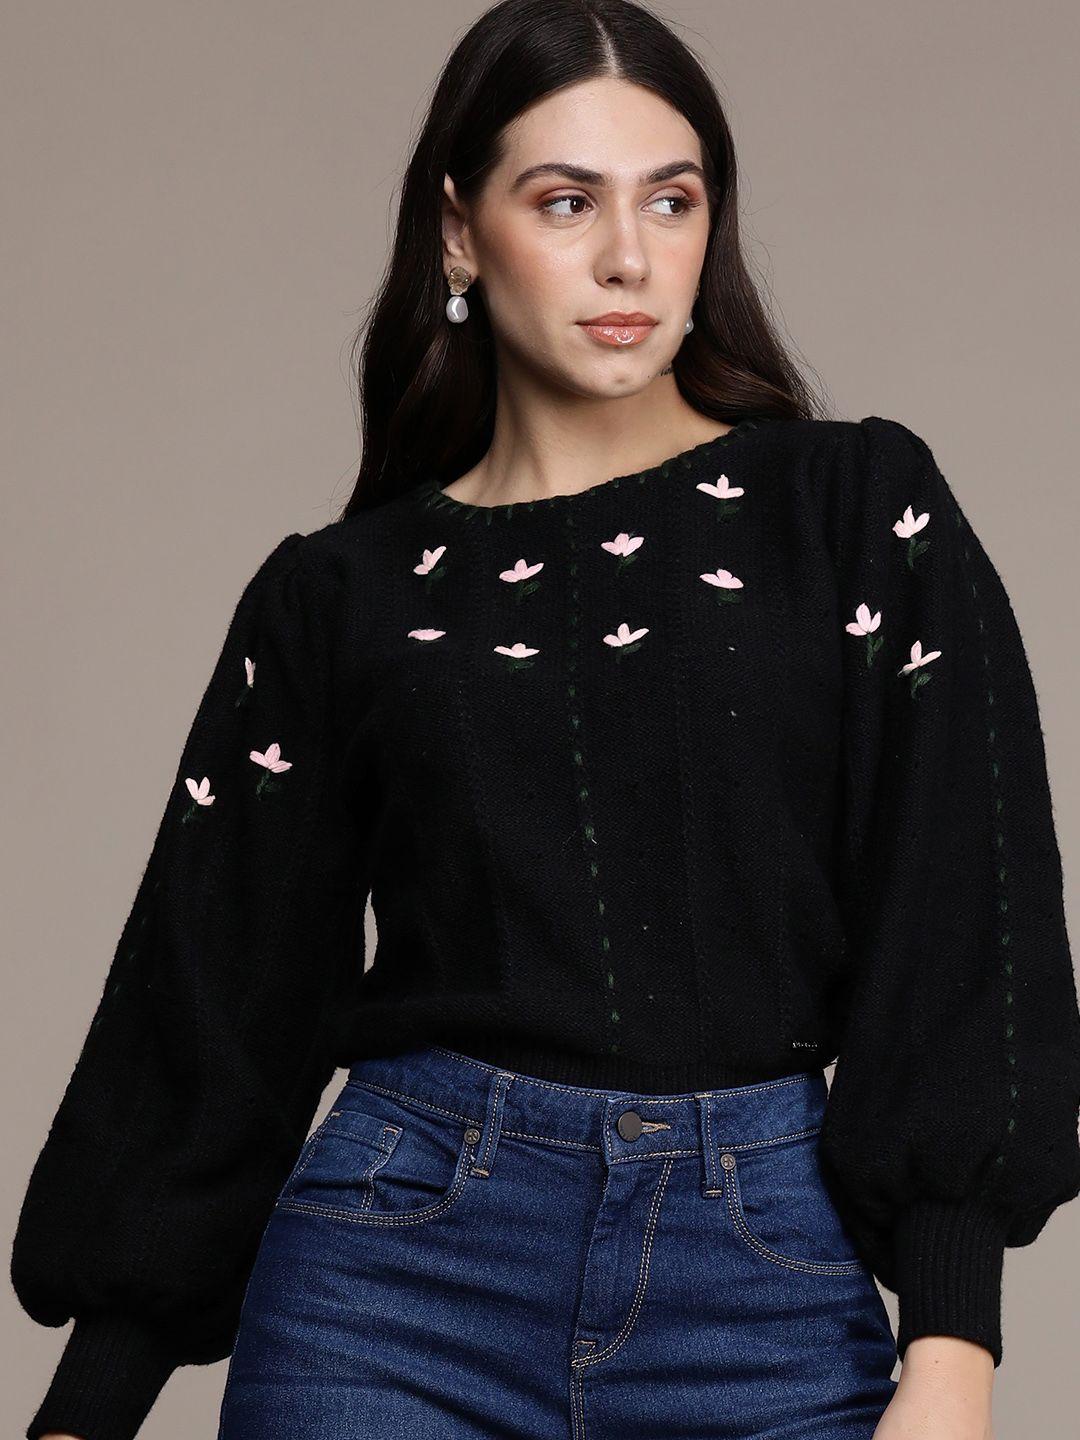 bebe women black & pink floral embroidered pullover sweater